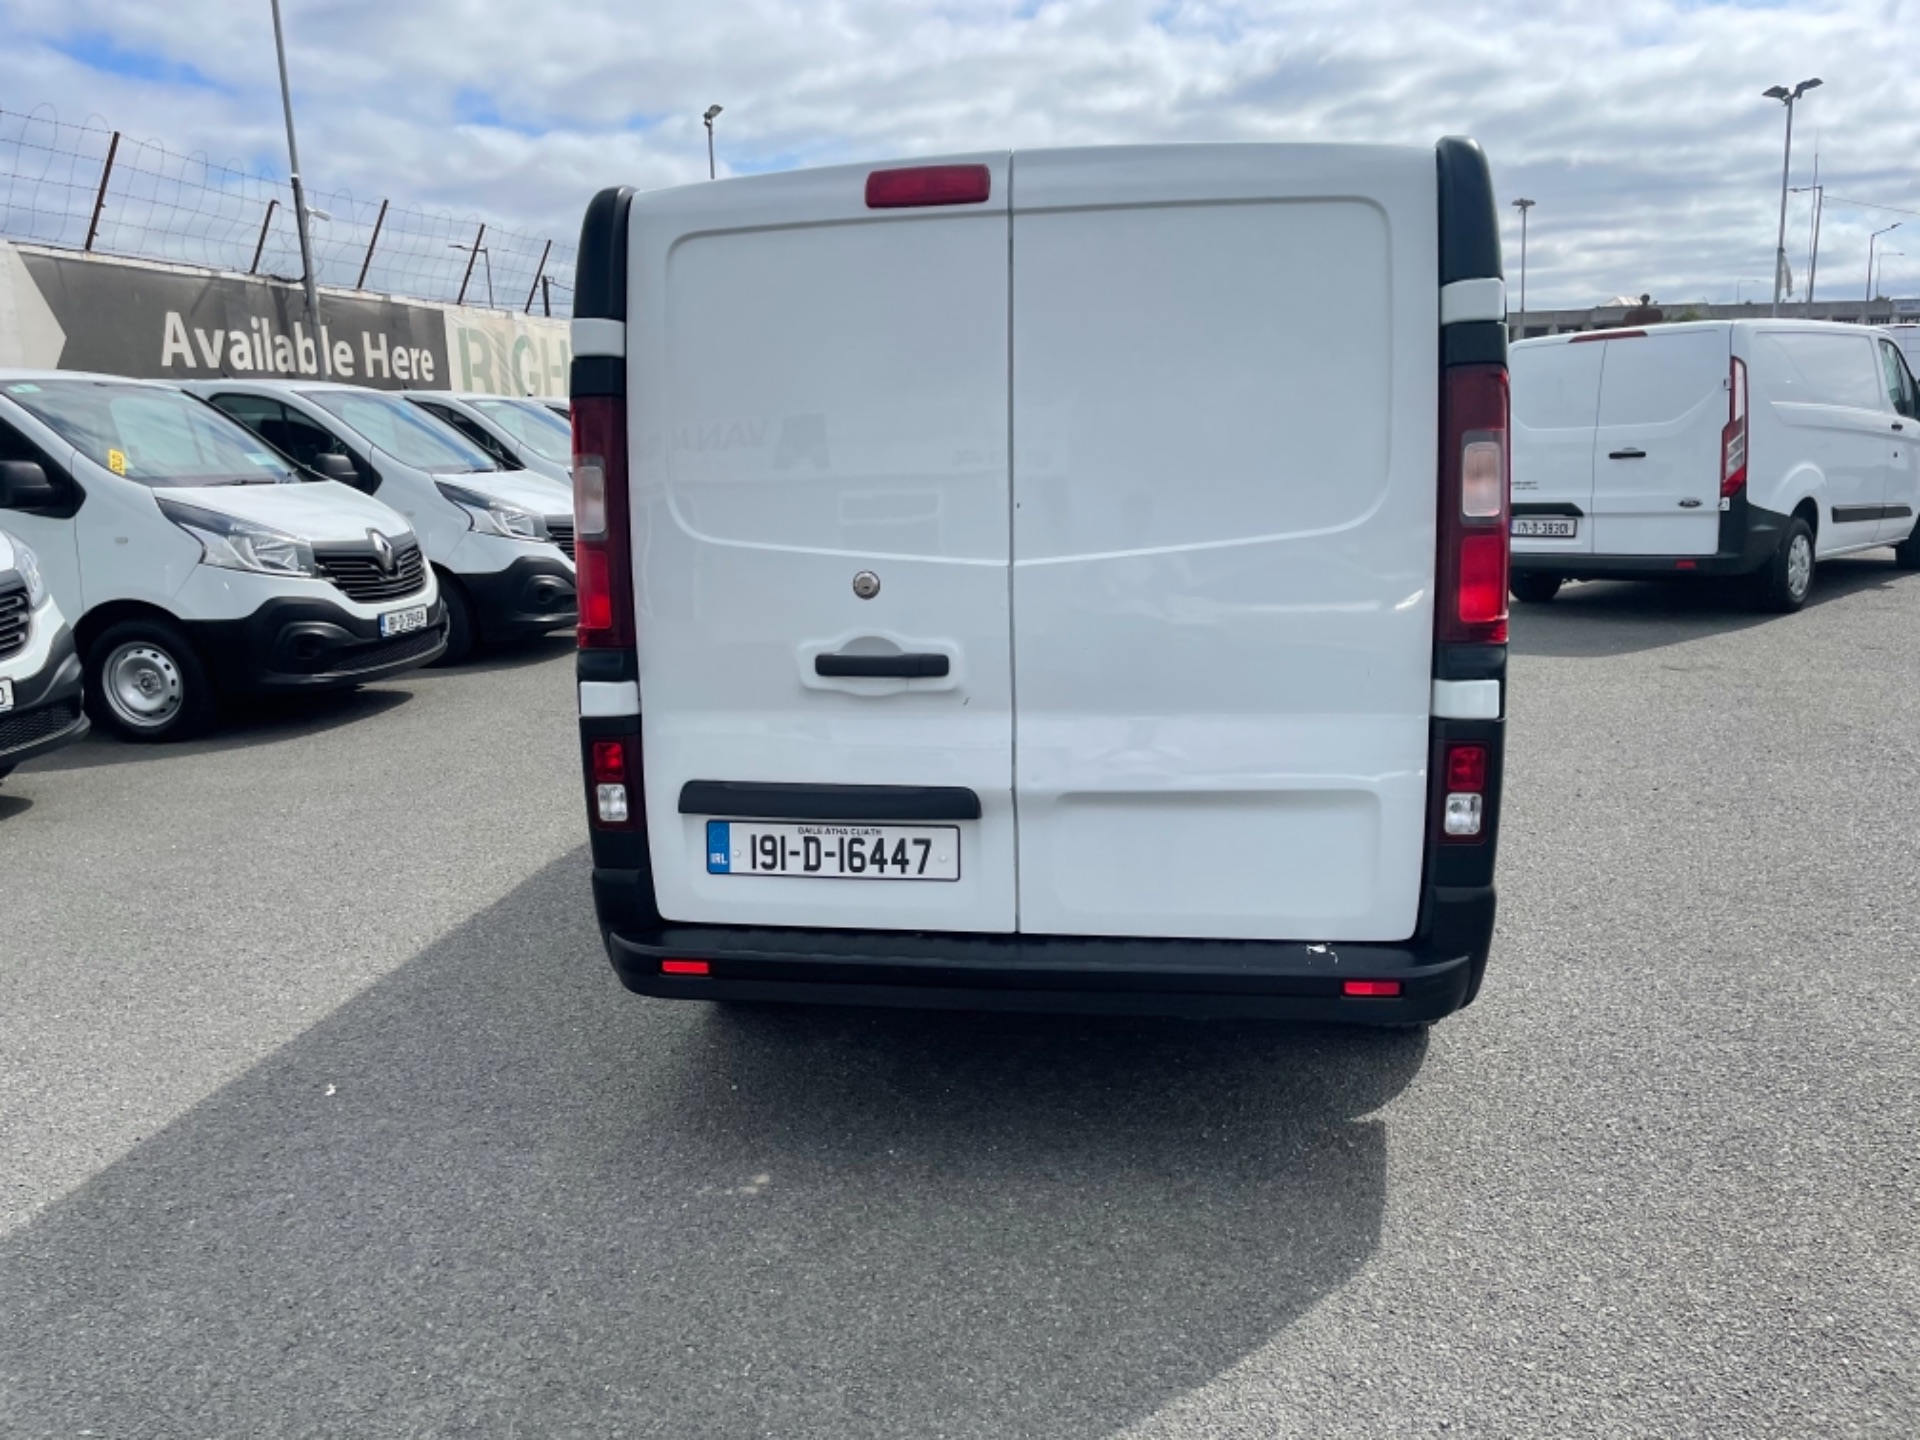 2019 Renault Trafic LL29 DCI 120 Business (191D16447) Thumbnail 6